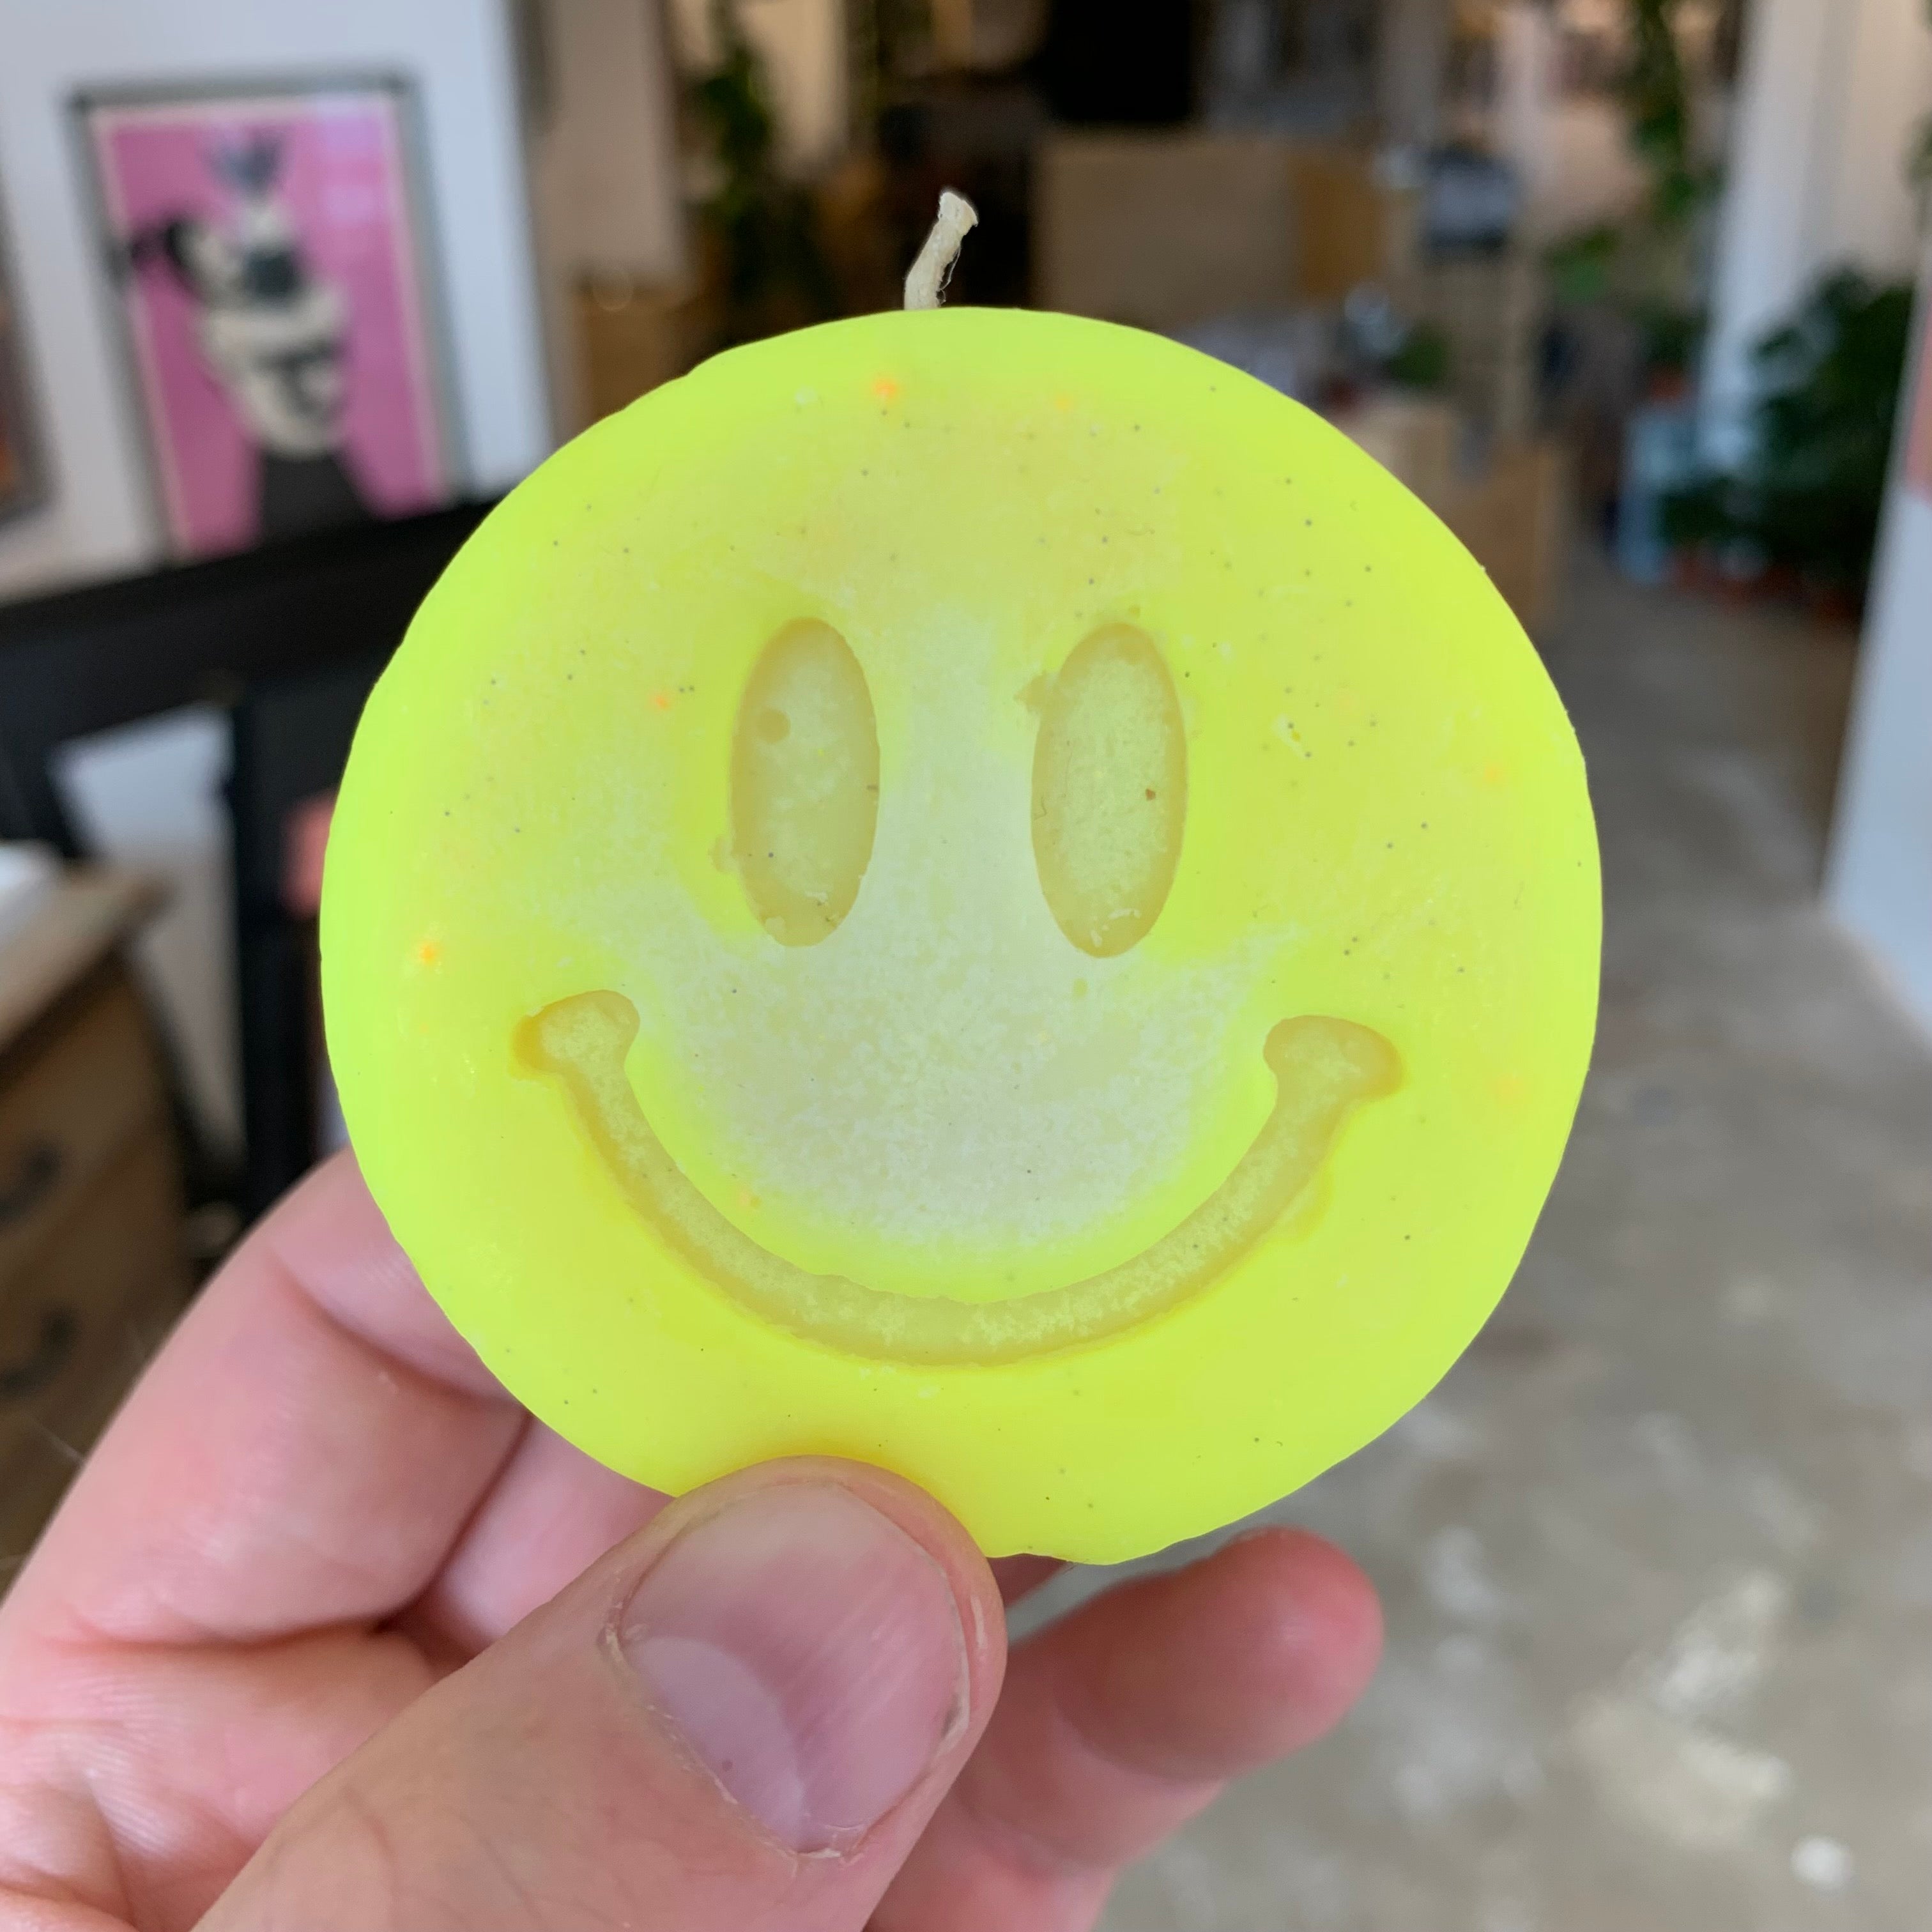 Replica Handmade Candles Of Iconic smiley GLOW IN THE DARK Ecstasy